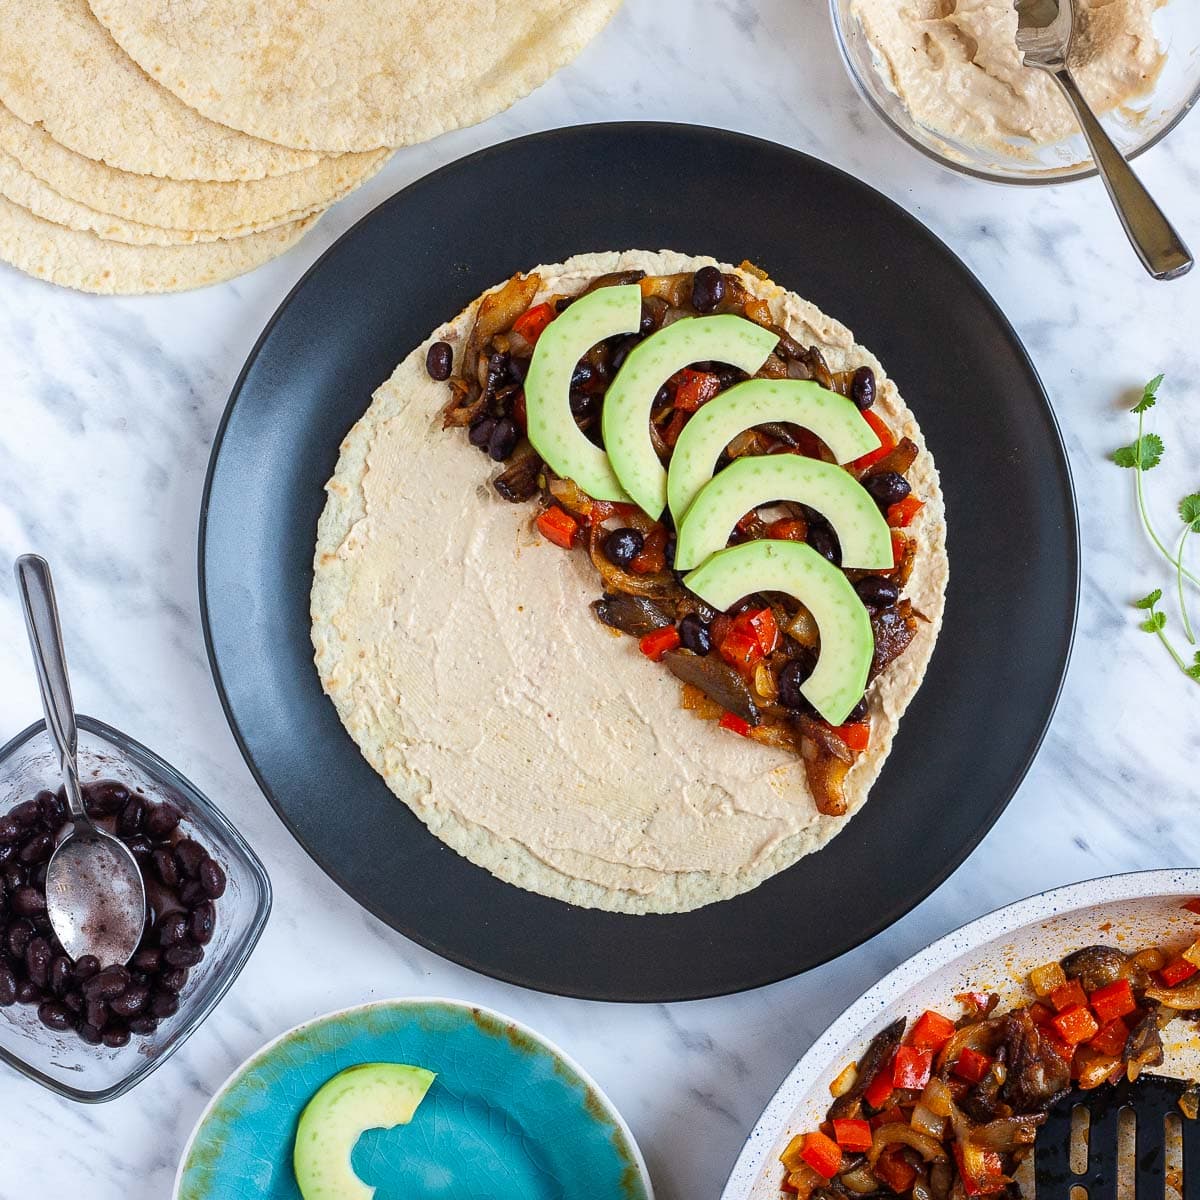 A tortilla covered with light brown hummus, chopped pan-fried veggies, and avocado slices. Leftover fillings are around it with more tortilla and more hummus.